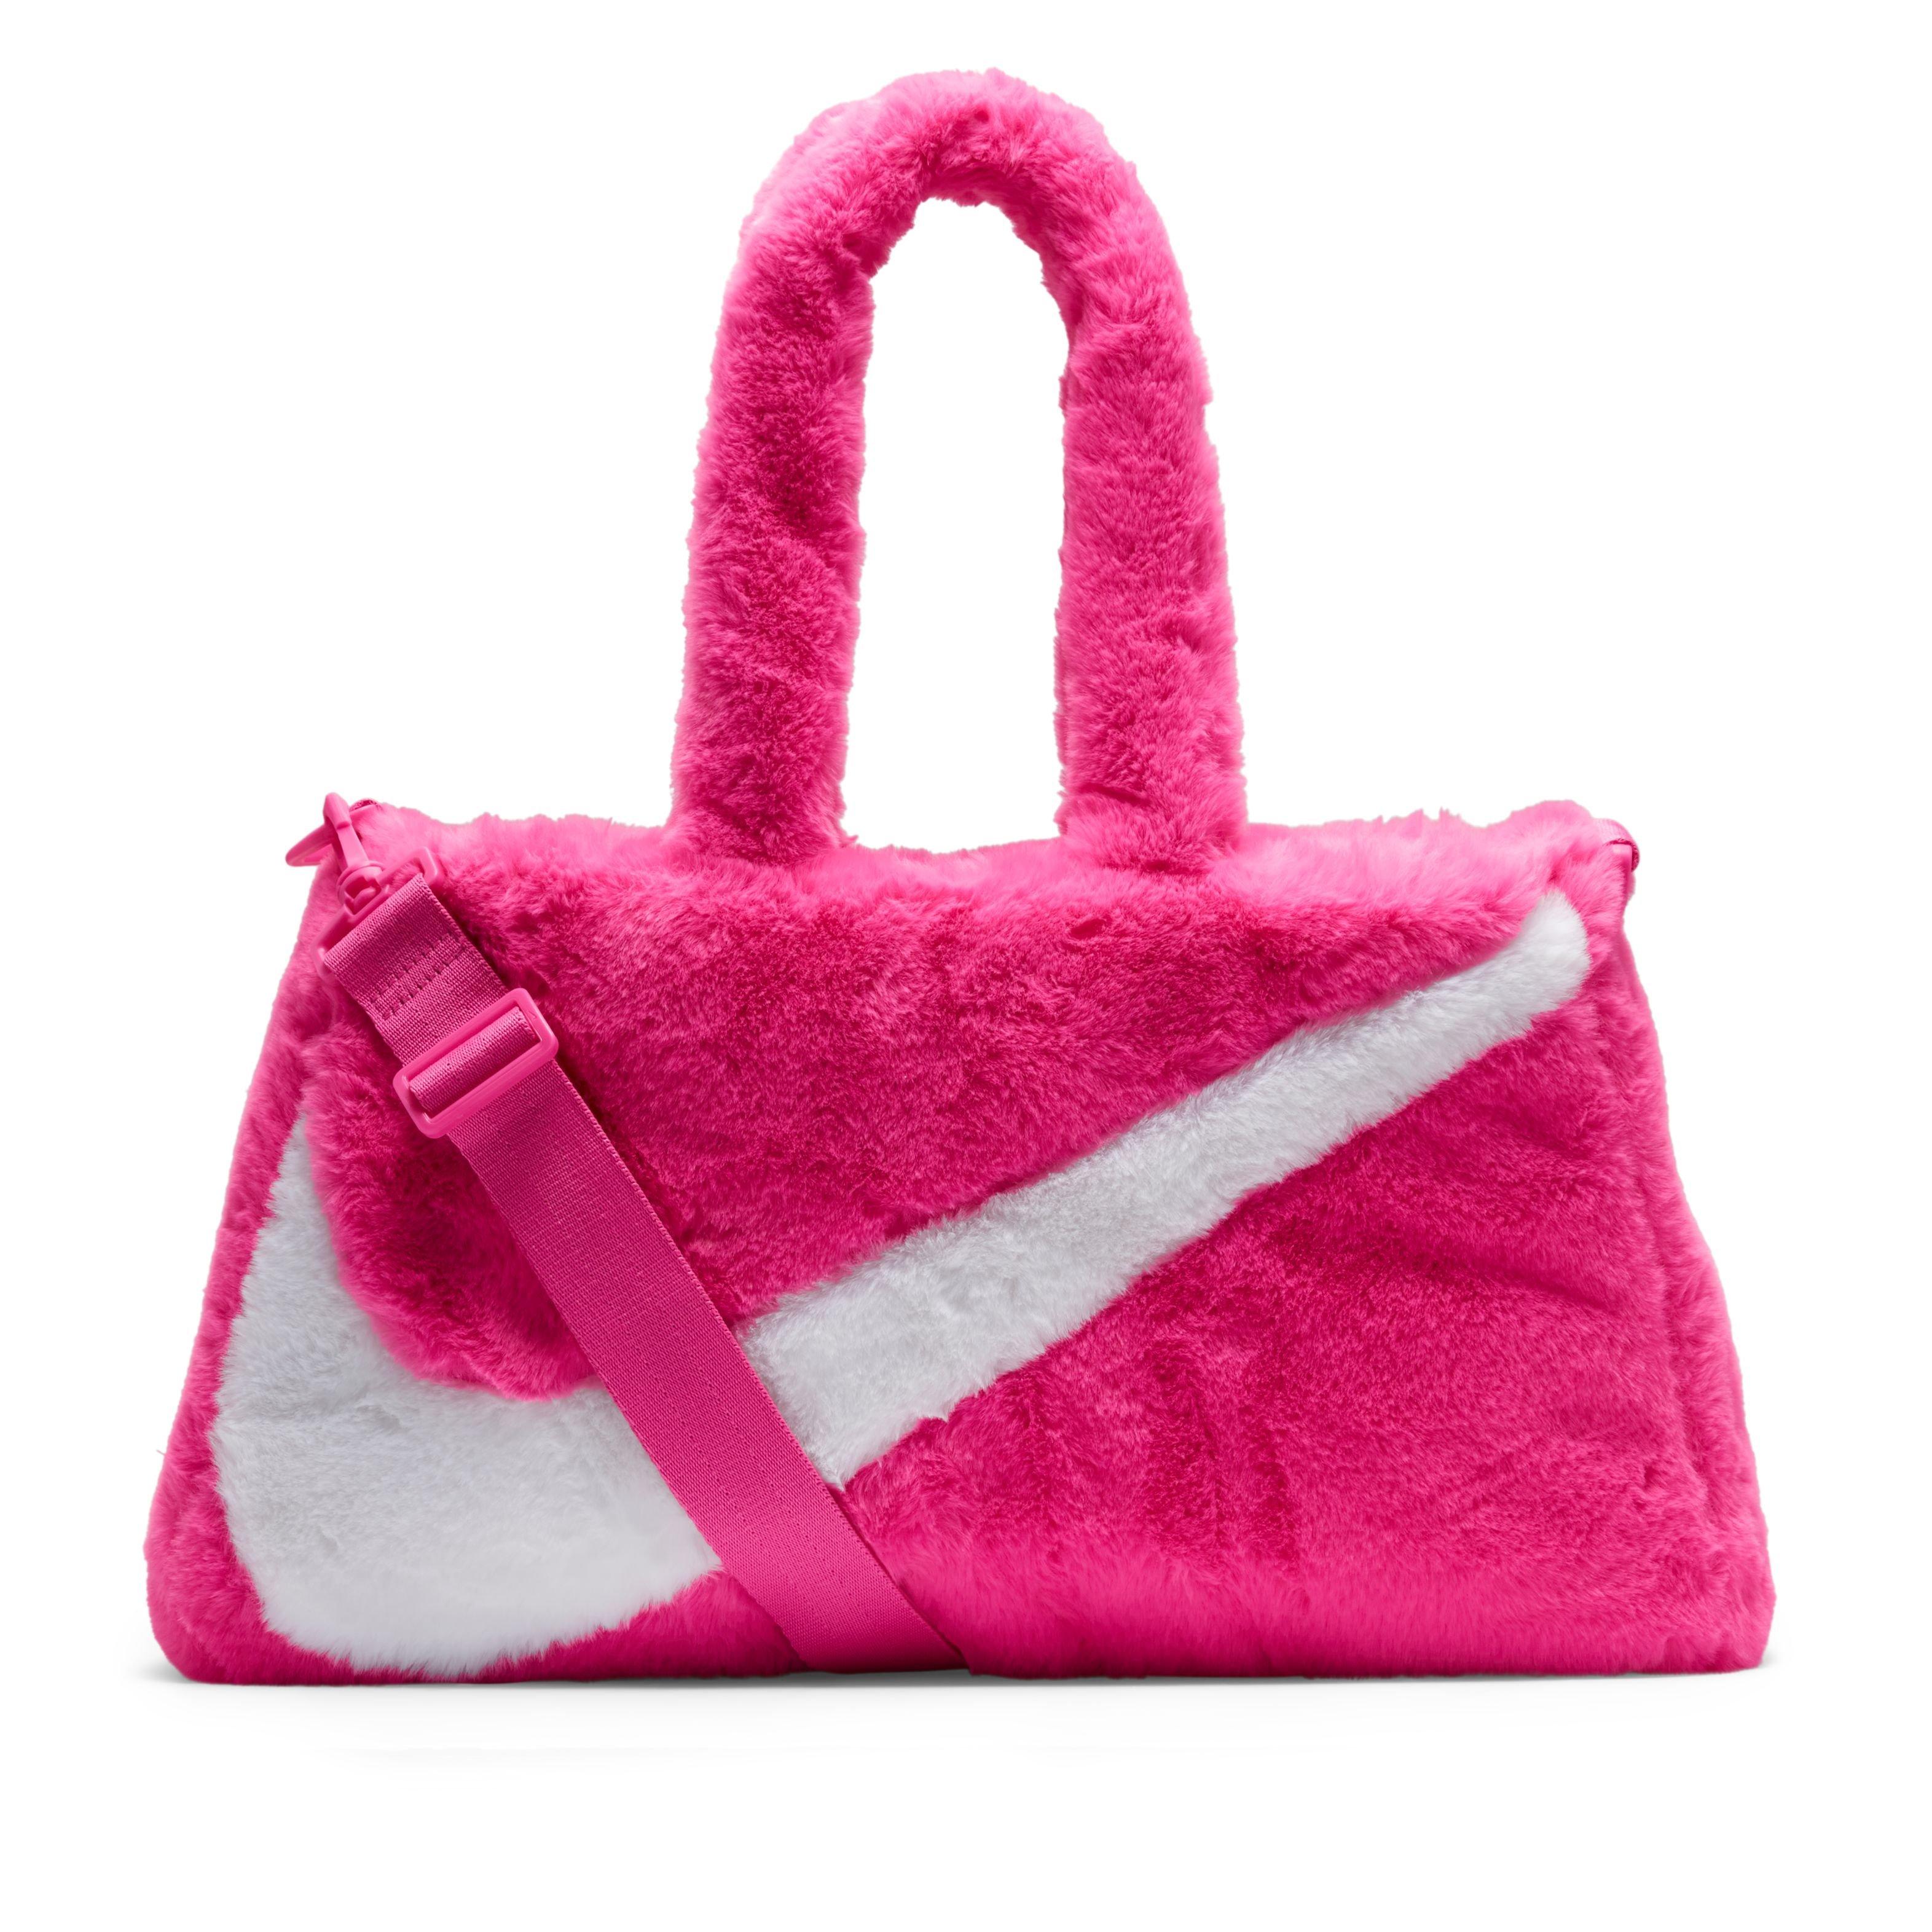 Nike Tote Bags for Women for sale